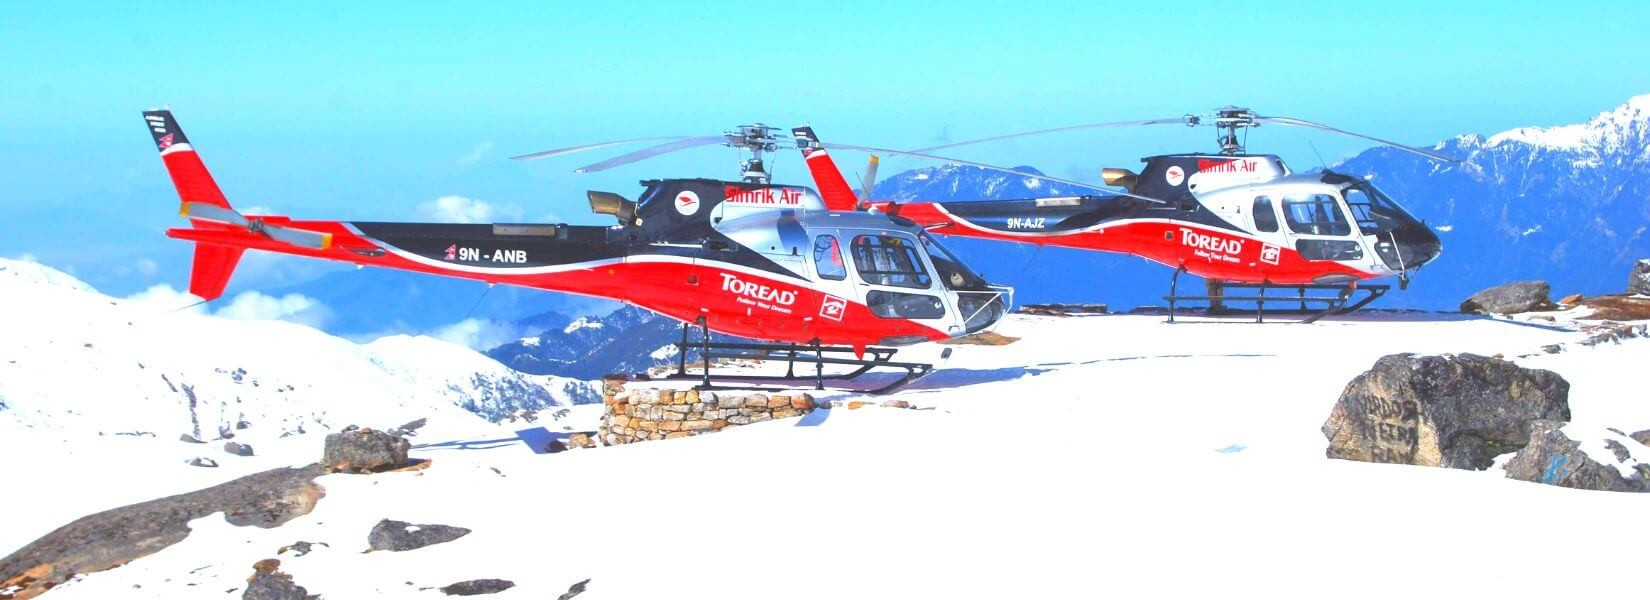 Helicopter Tour In Nepal